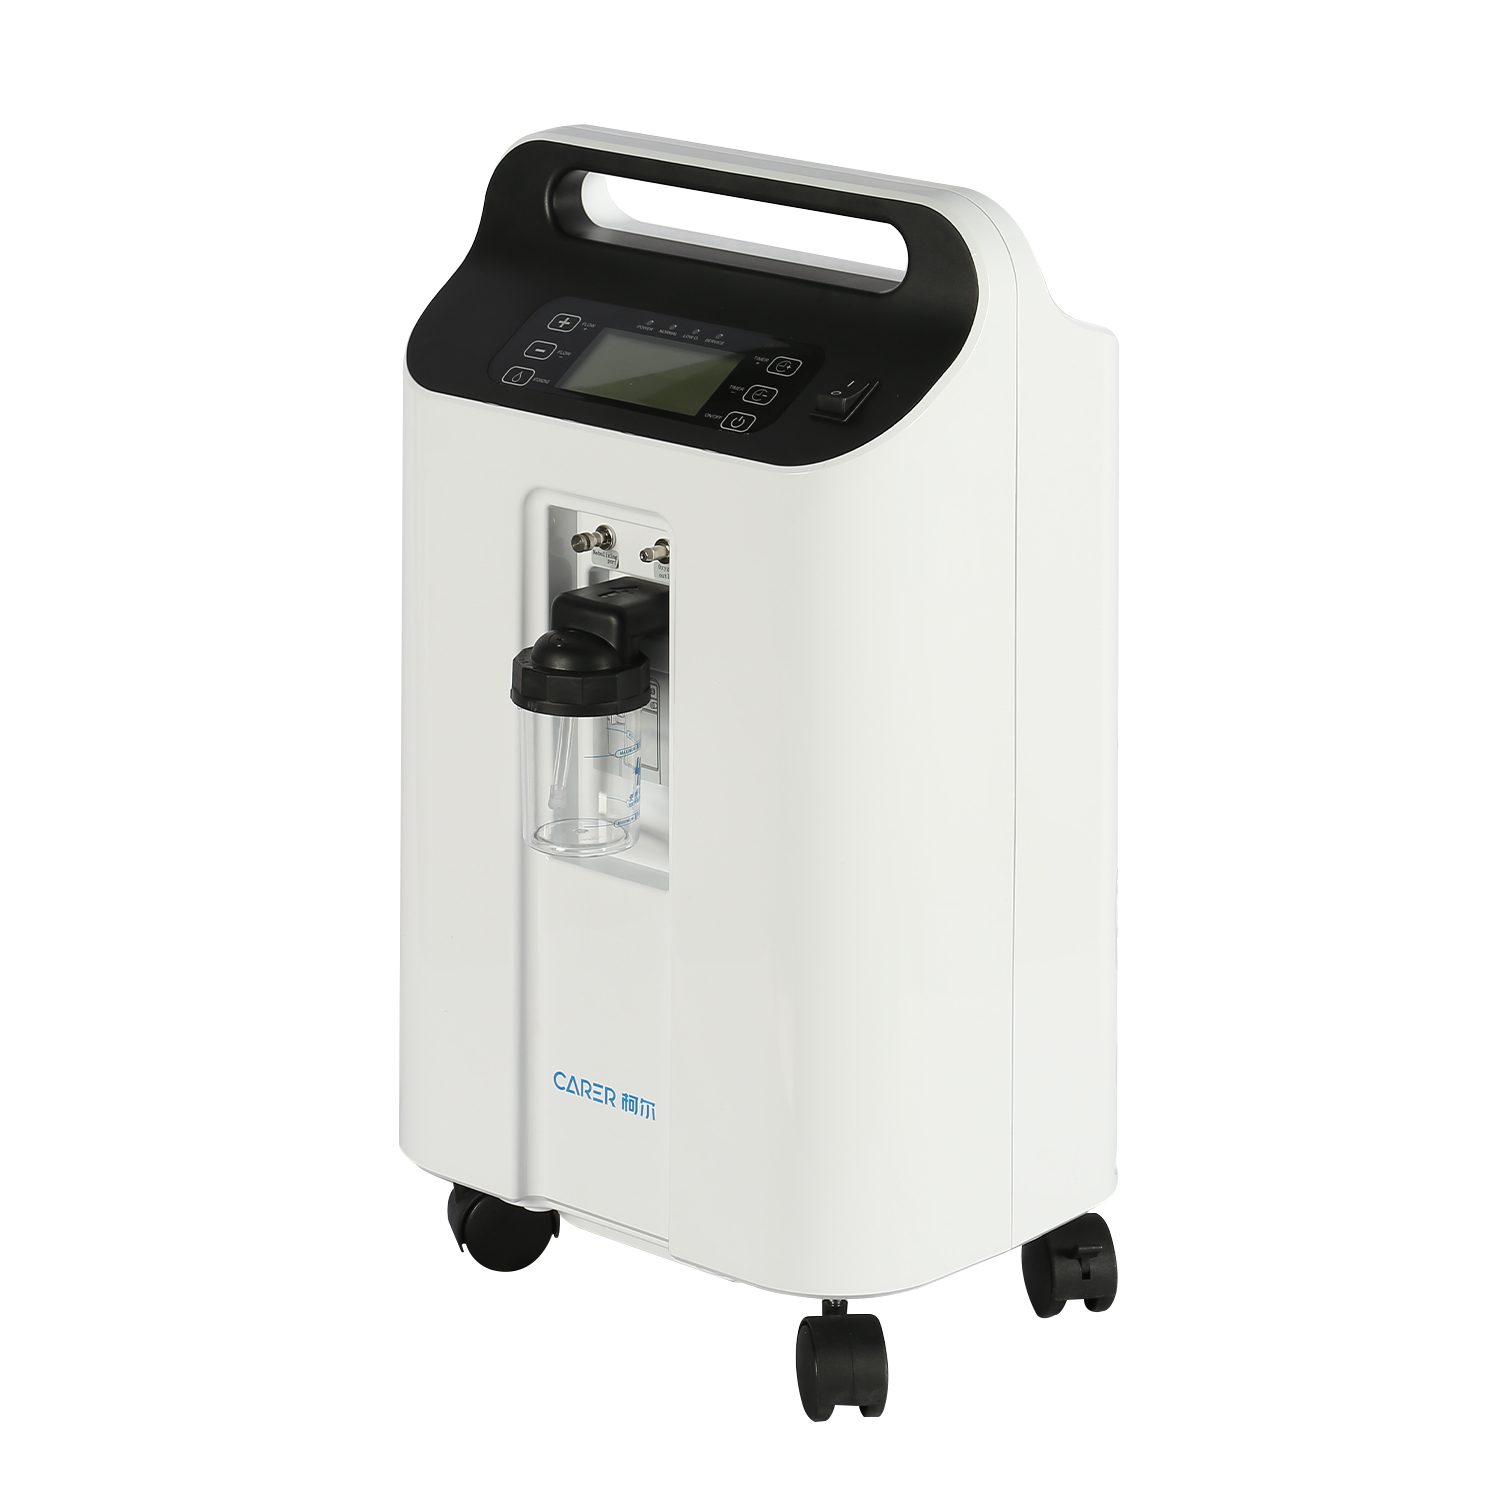 Details about oxygen concentrator CR-F5W